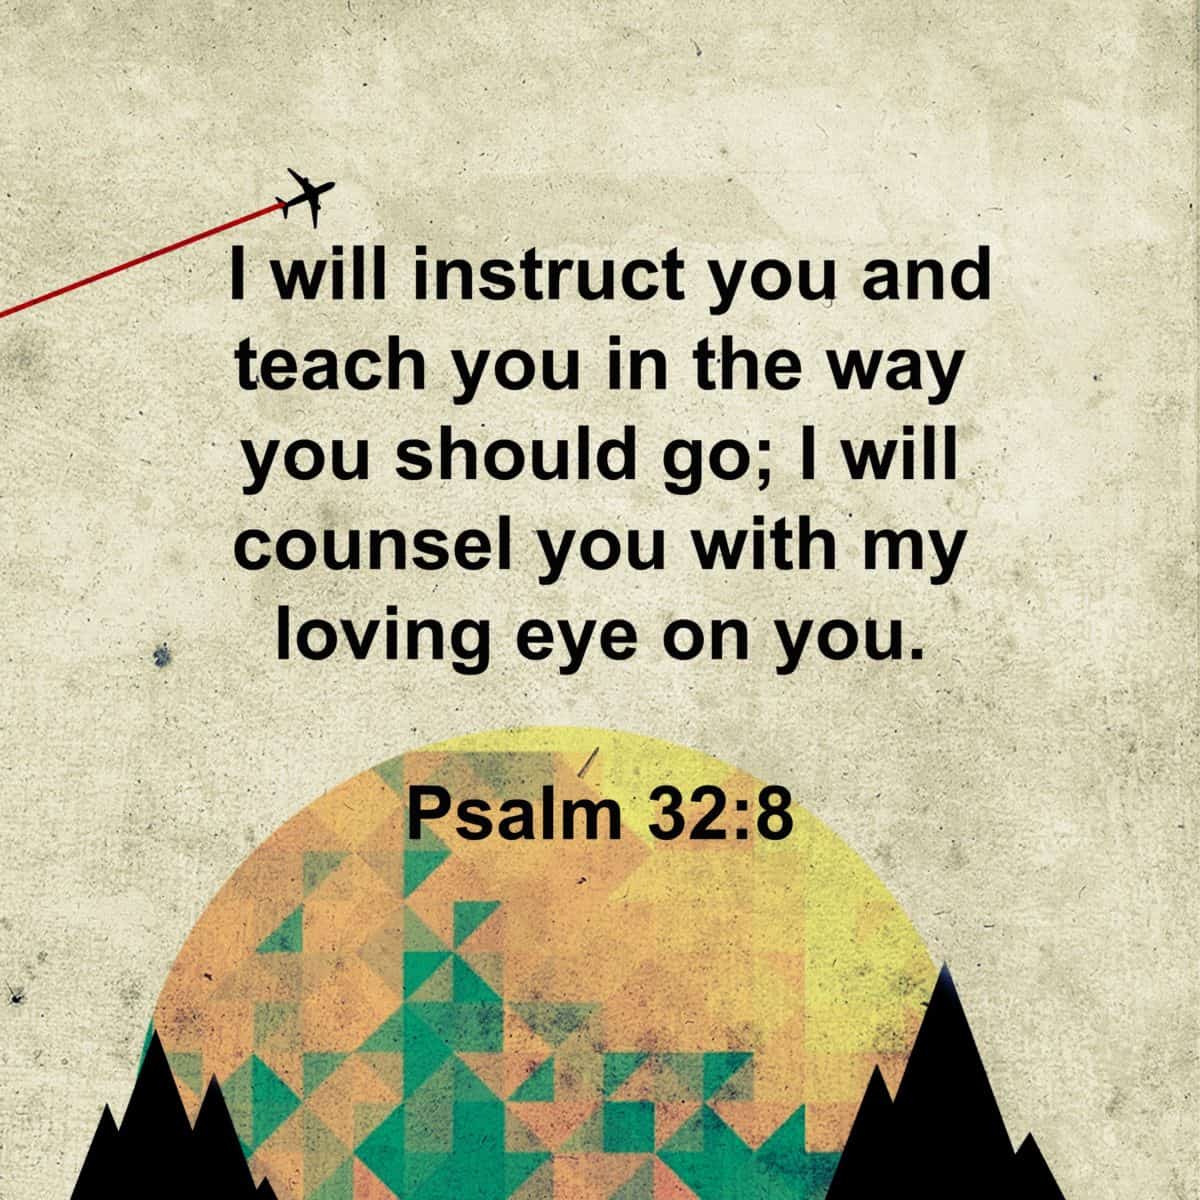 I will instruct you and teach you in the way you should go I will counsel you with my loving eye on you Psalm 328